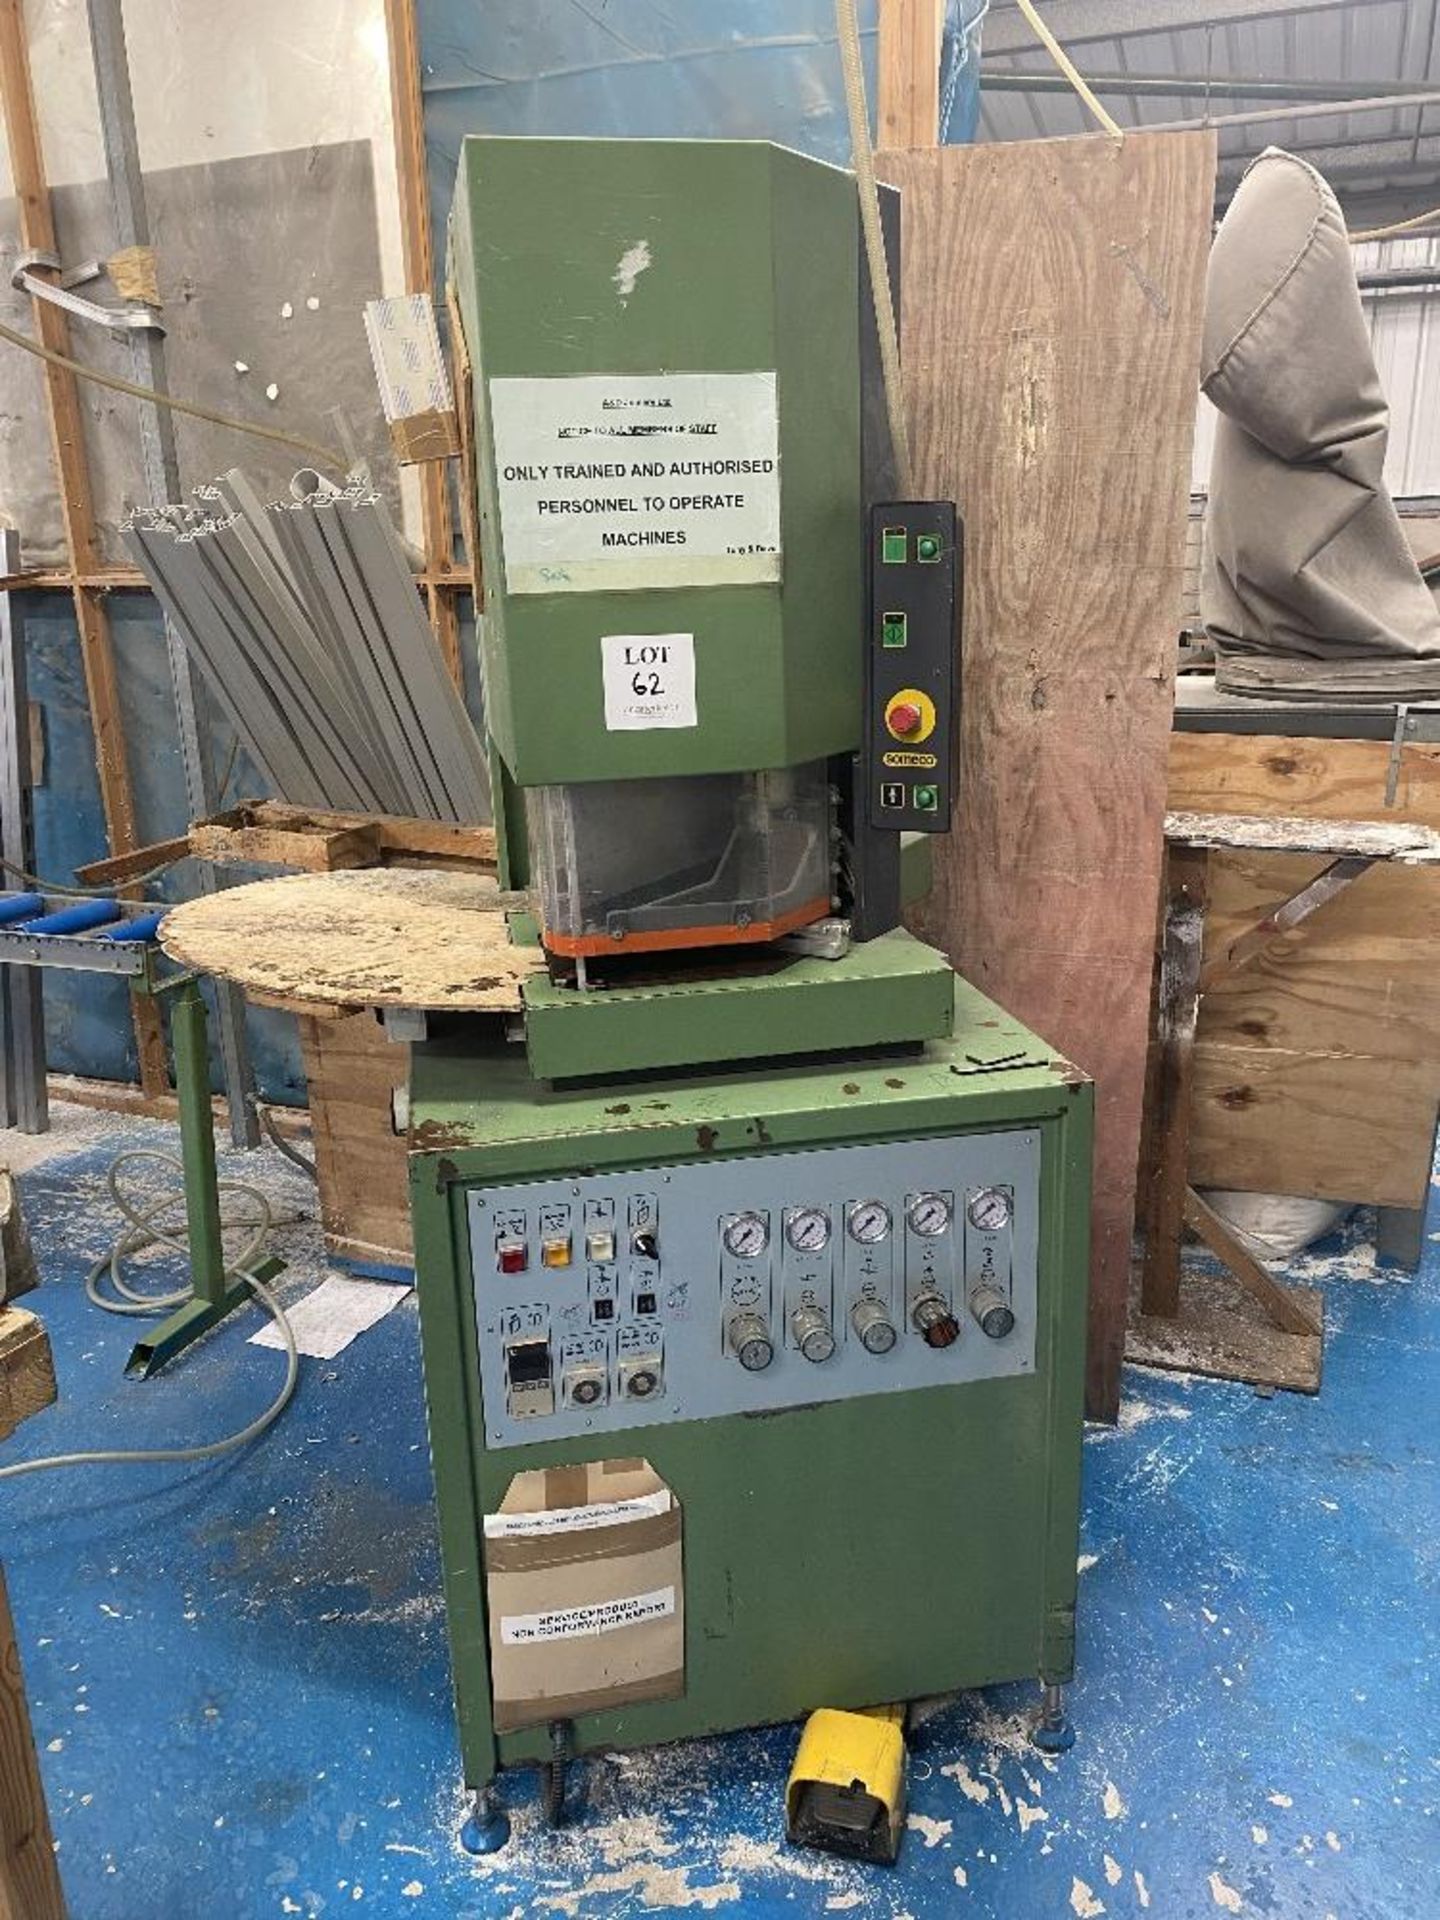 Someco 510 H LV single head welder, Year of Manufacture 2001, Serial Number 55220901 (METHOD